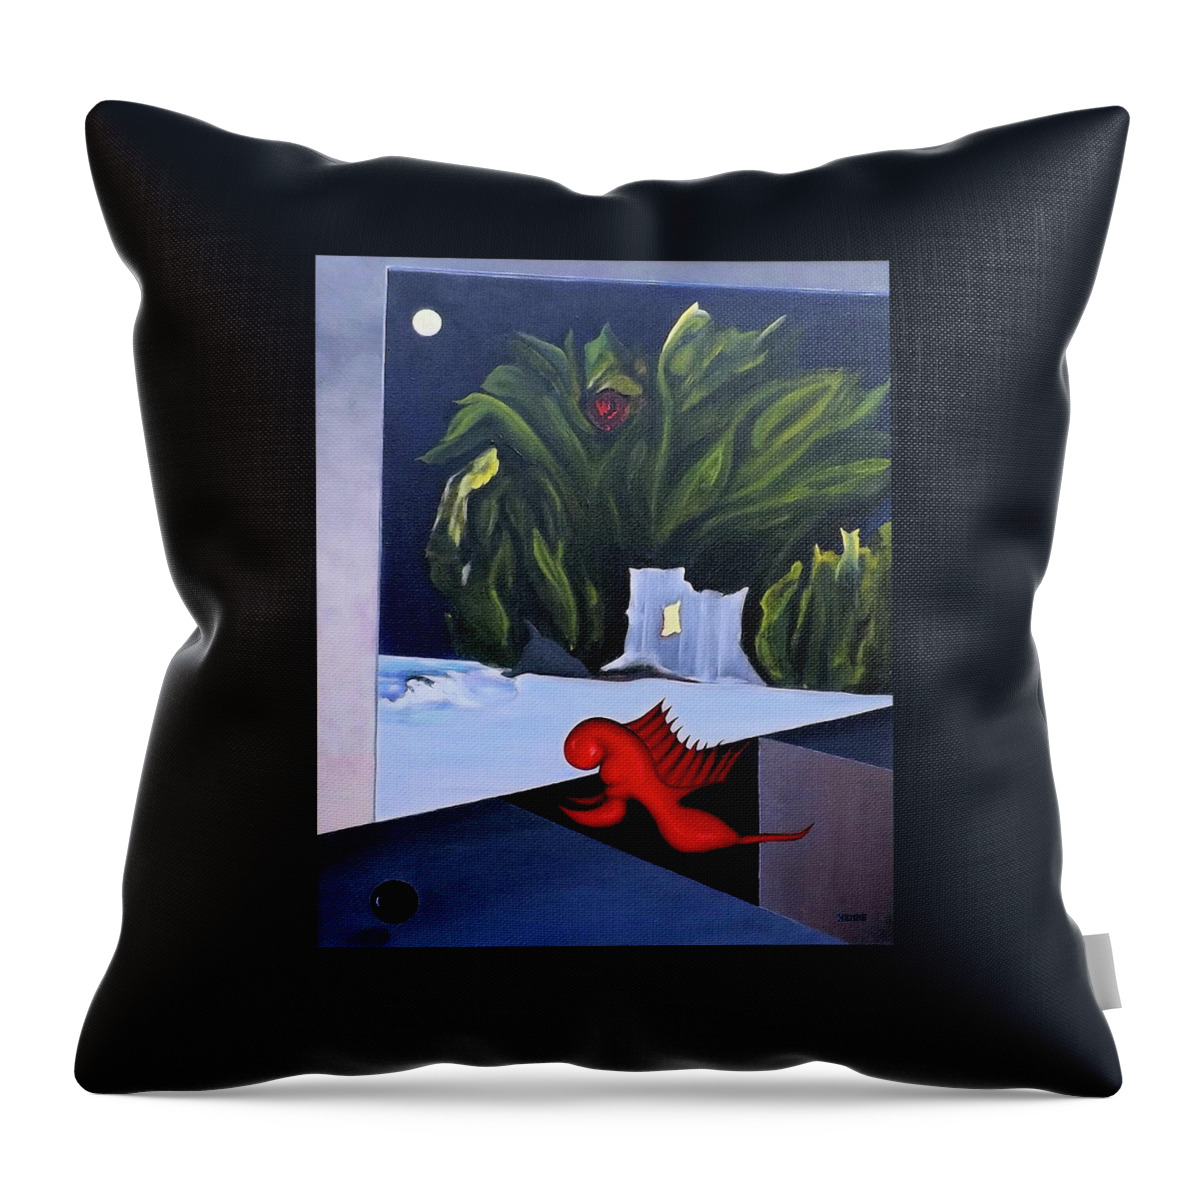 Digital Throw Pillow featuring the painting Pandora's Box by Robert Henne